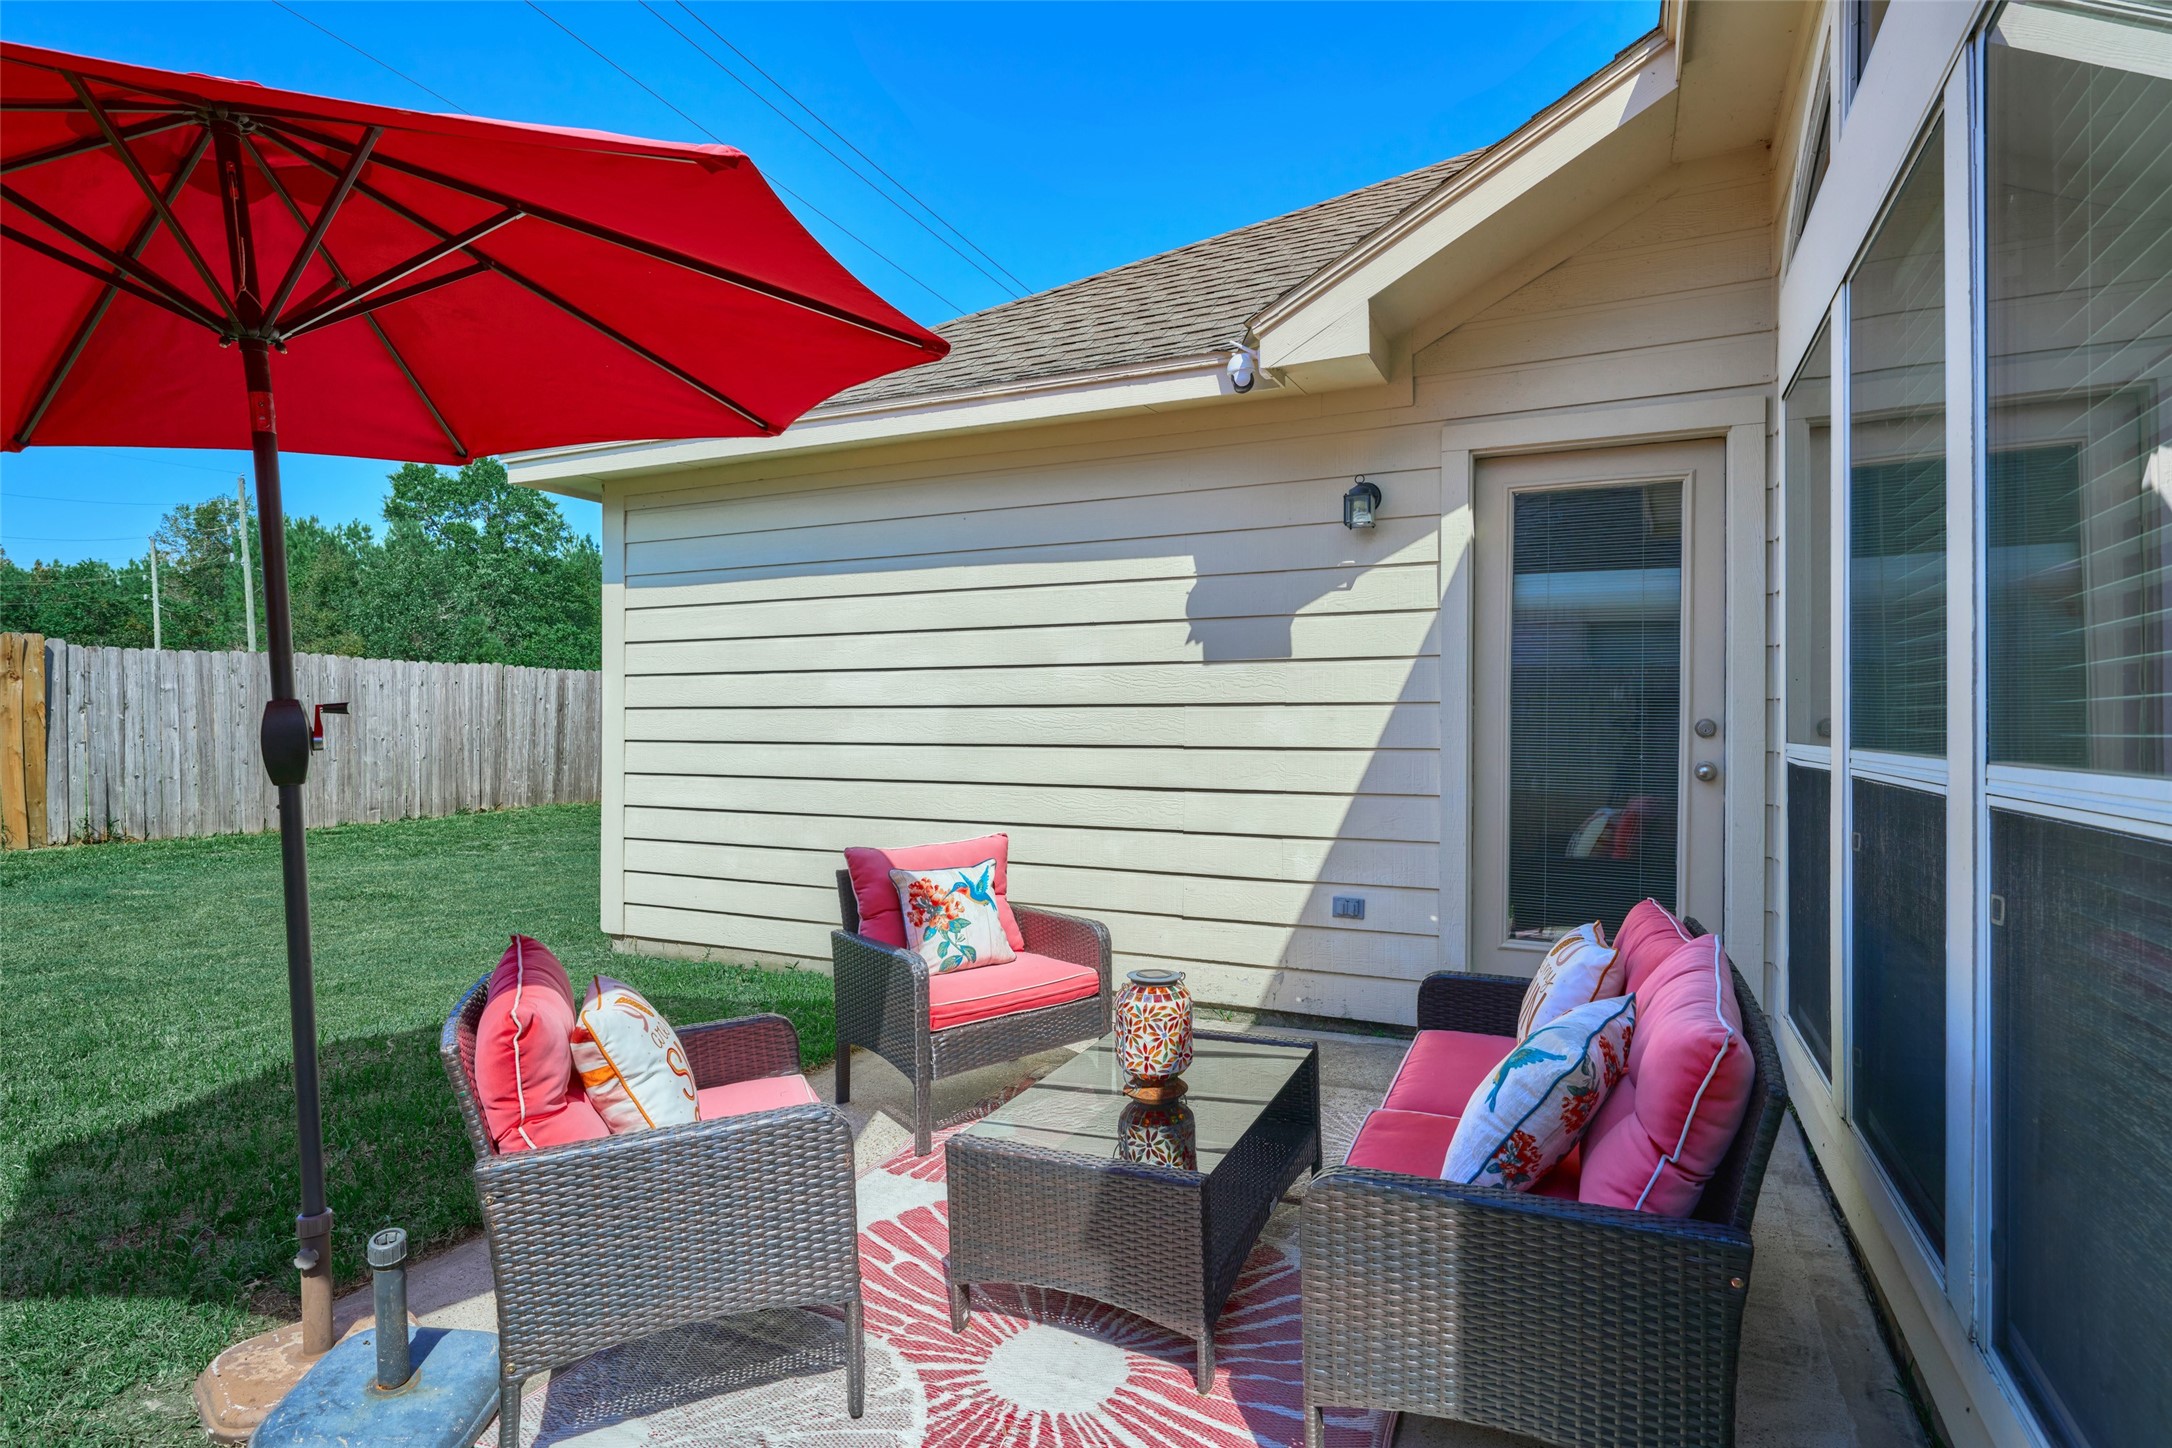 Great for entertaining or just relaxing the patio is the perfect place to enjoy the home's outdoor spaces.